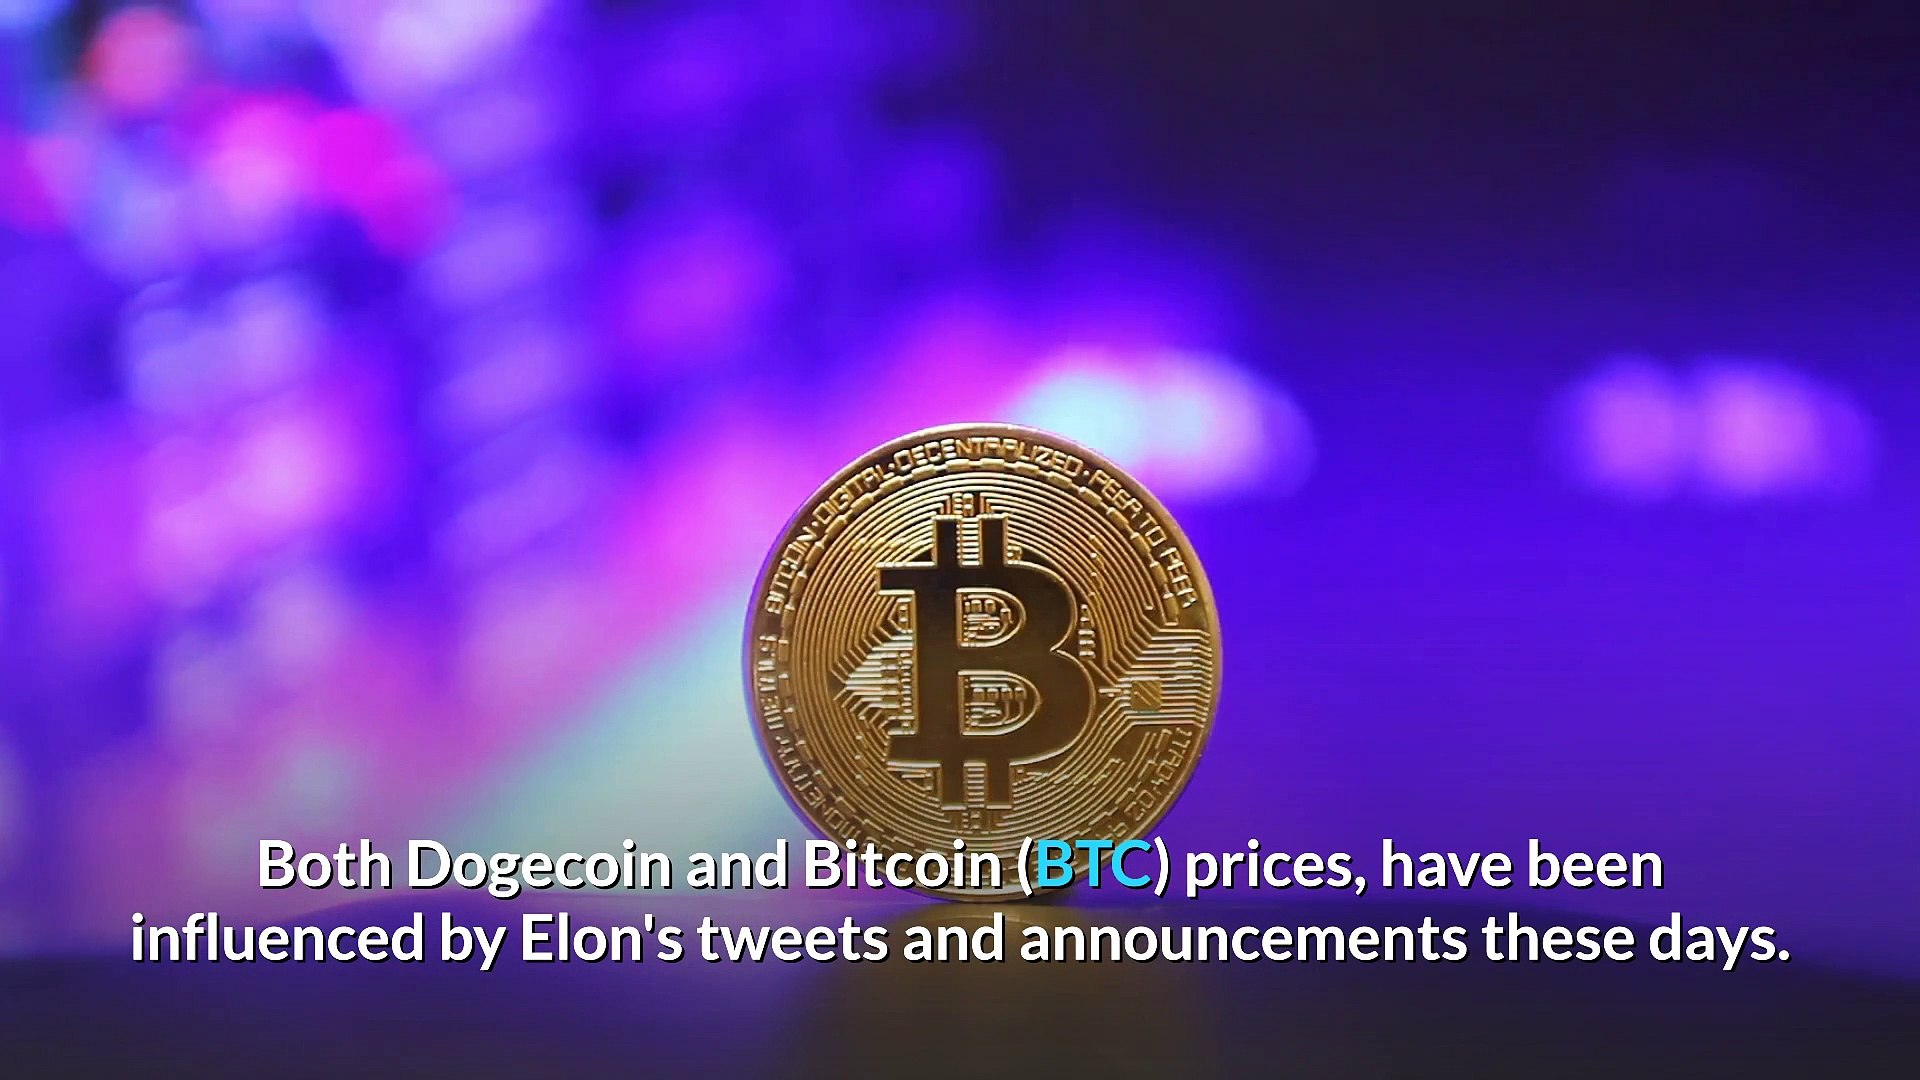 Crypto News - Elon Musk Working With Dogecoin To Improve Transaction Speed - Bitcoin News